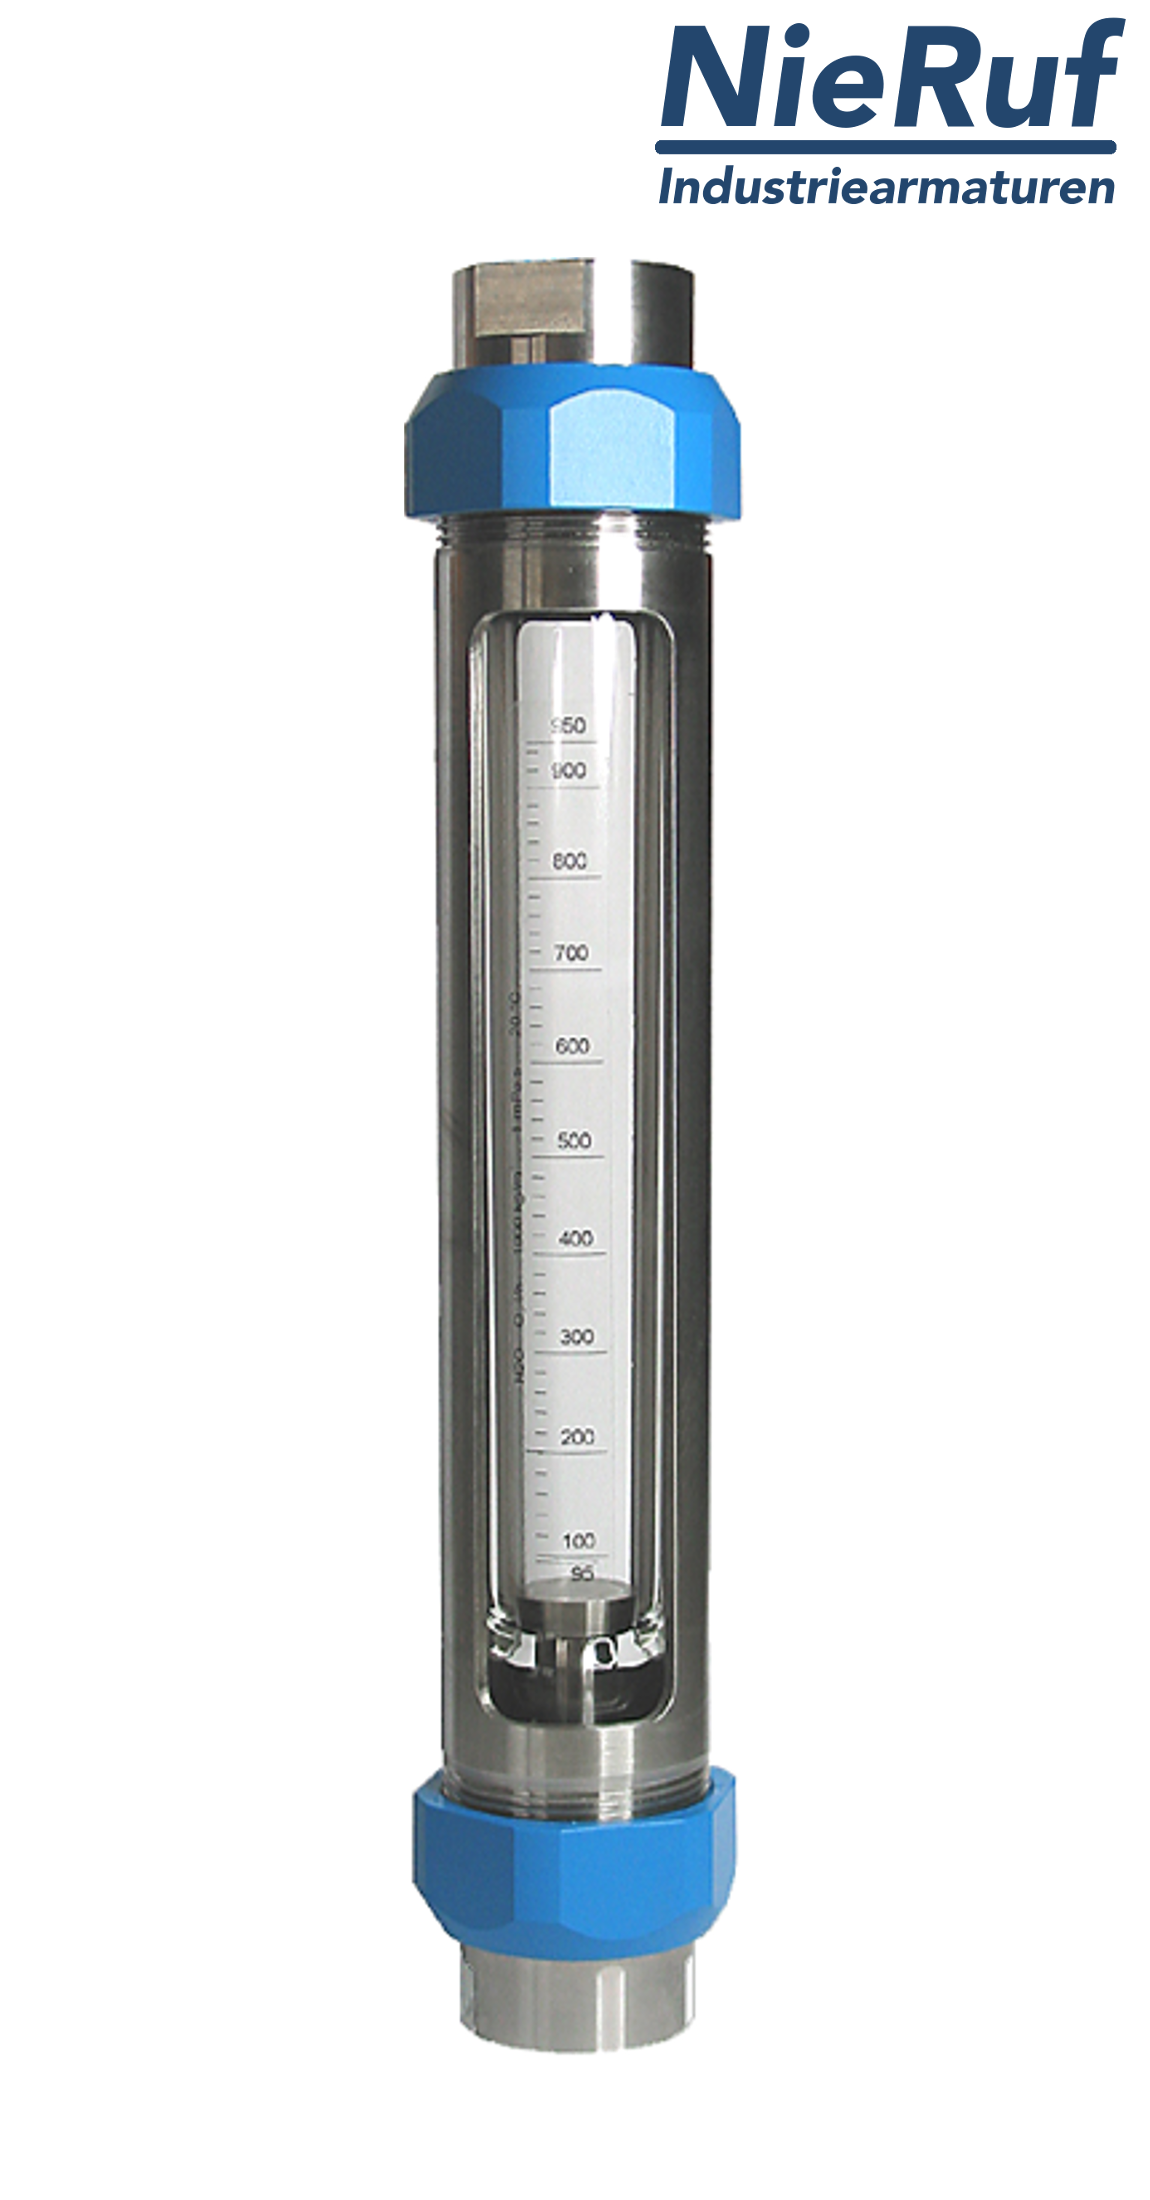 Variable area flowmeter stainless steel + borosilicate 1" Inch 100.0 - 1000 l/h water EPDM